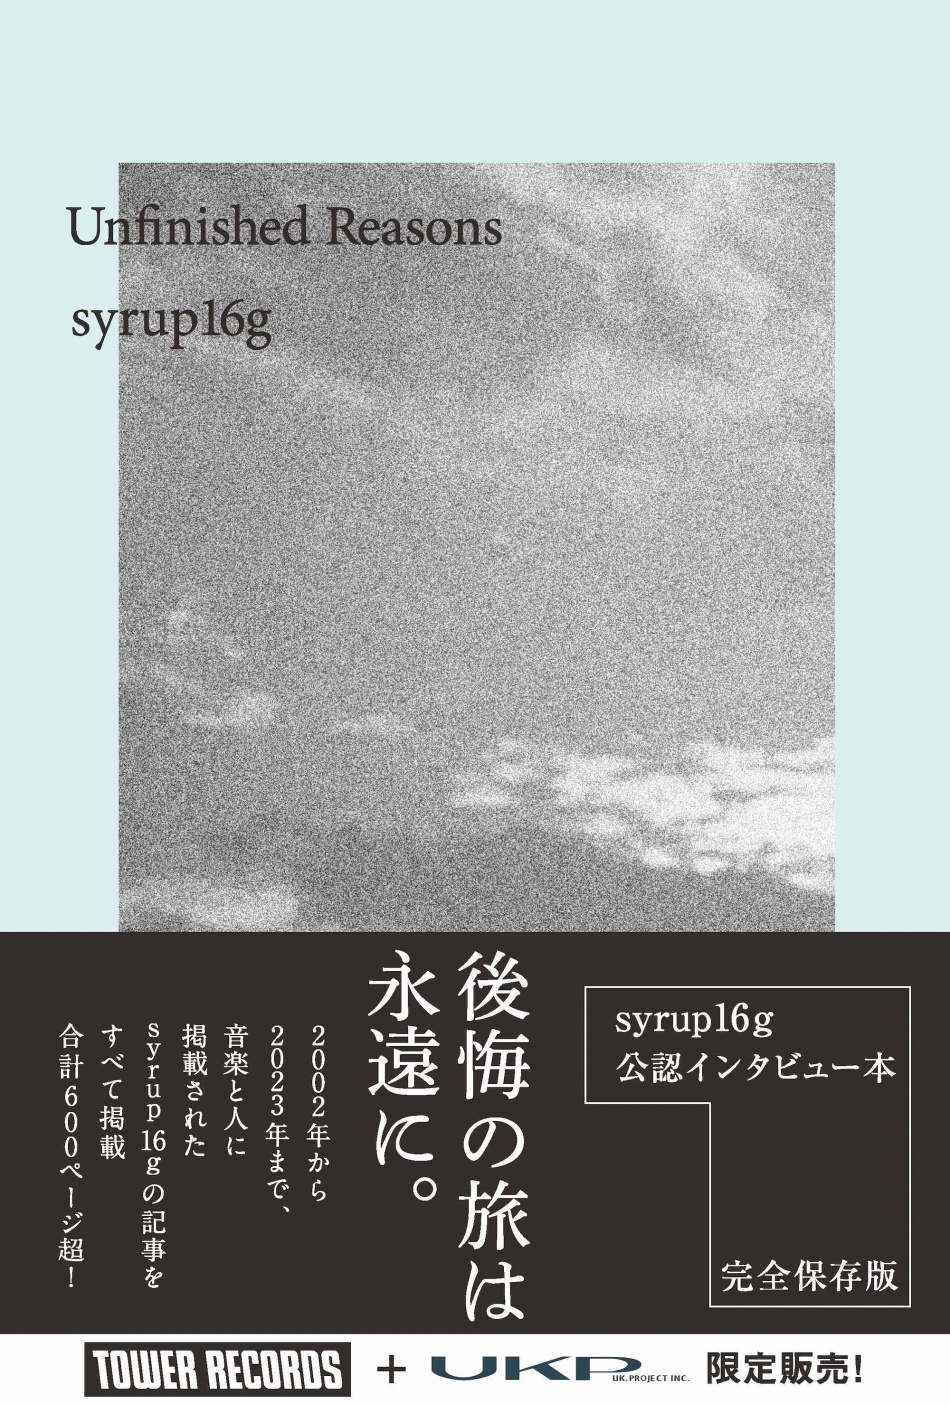 syrup16g-Unfinished Reasons